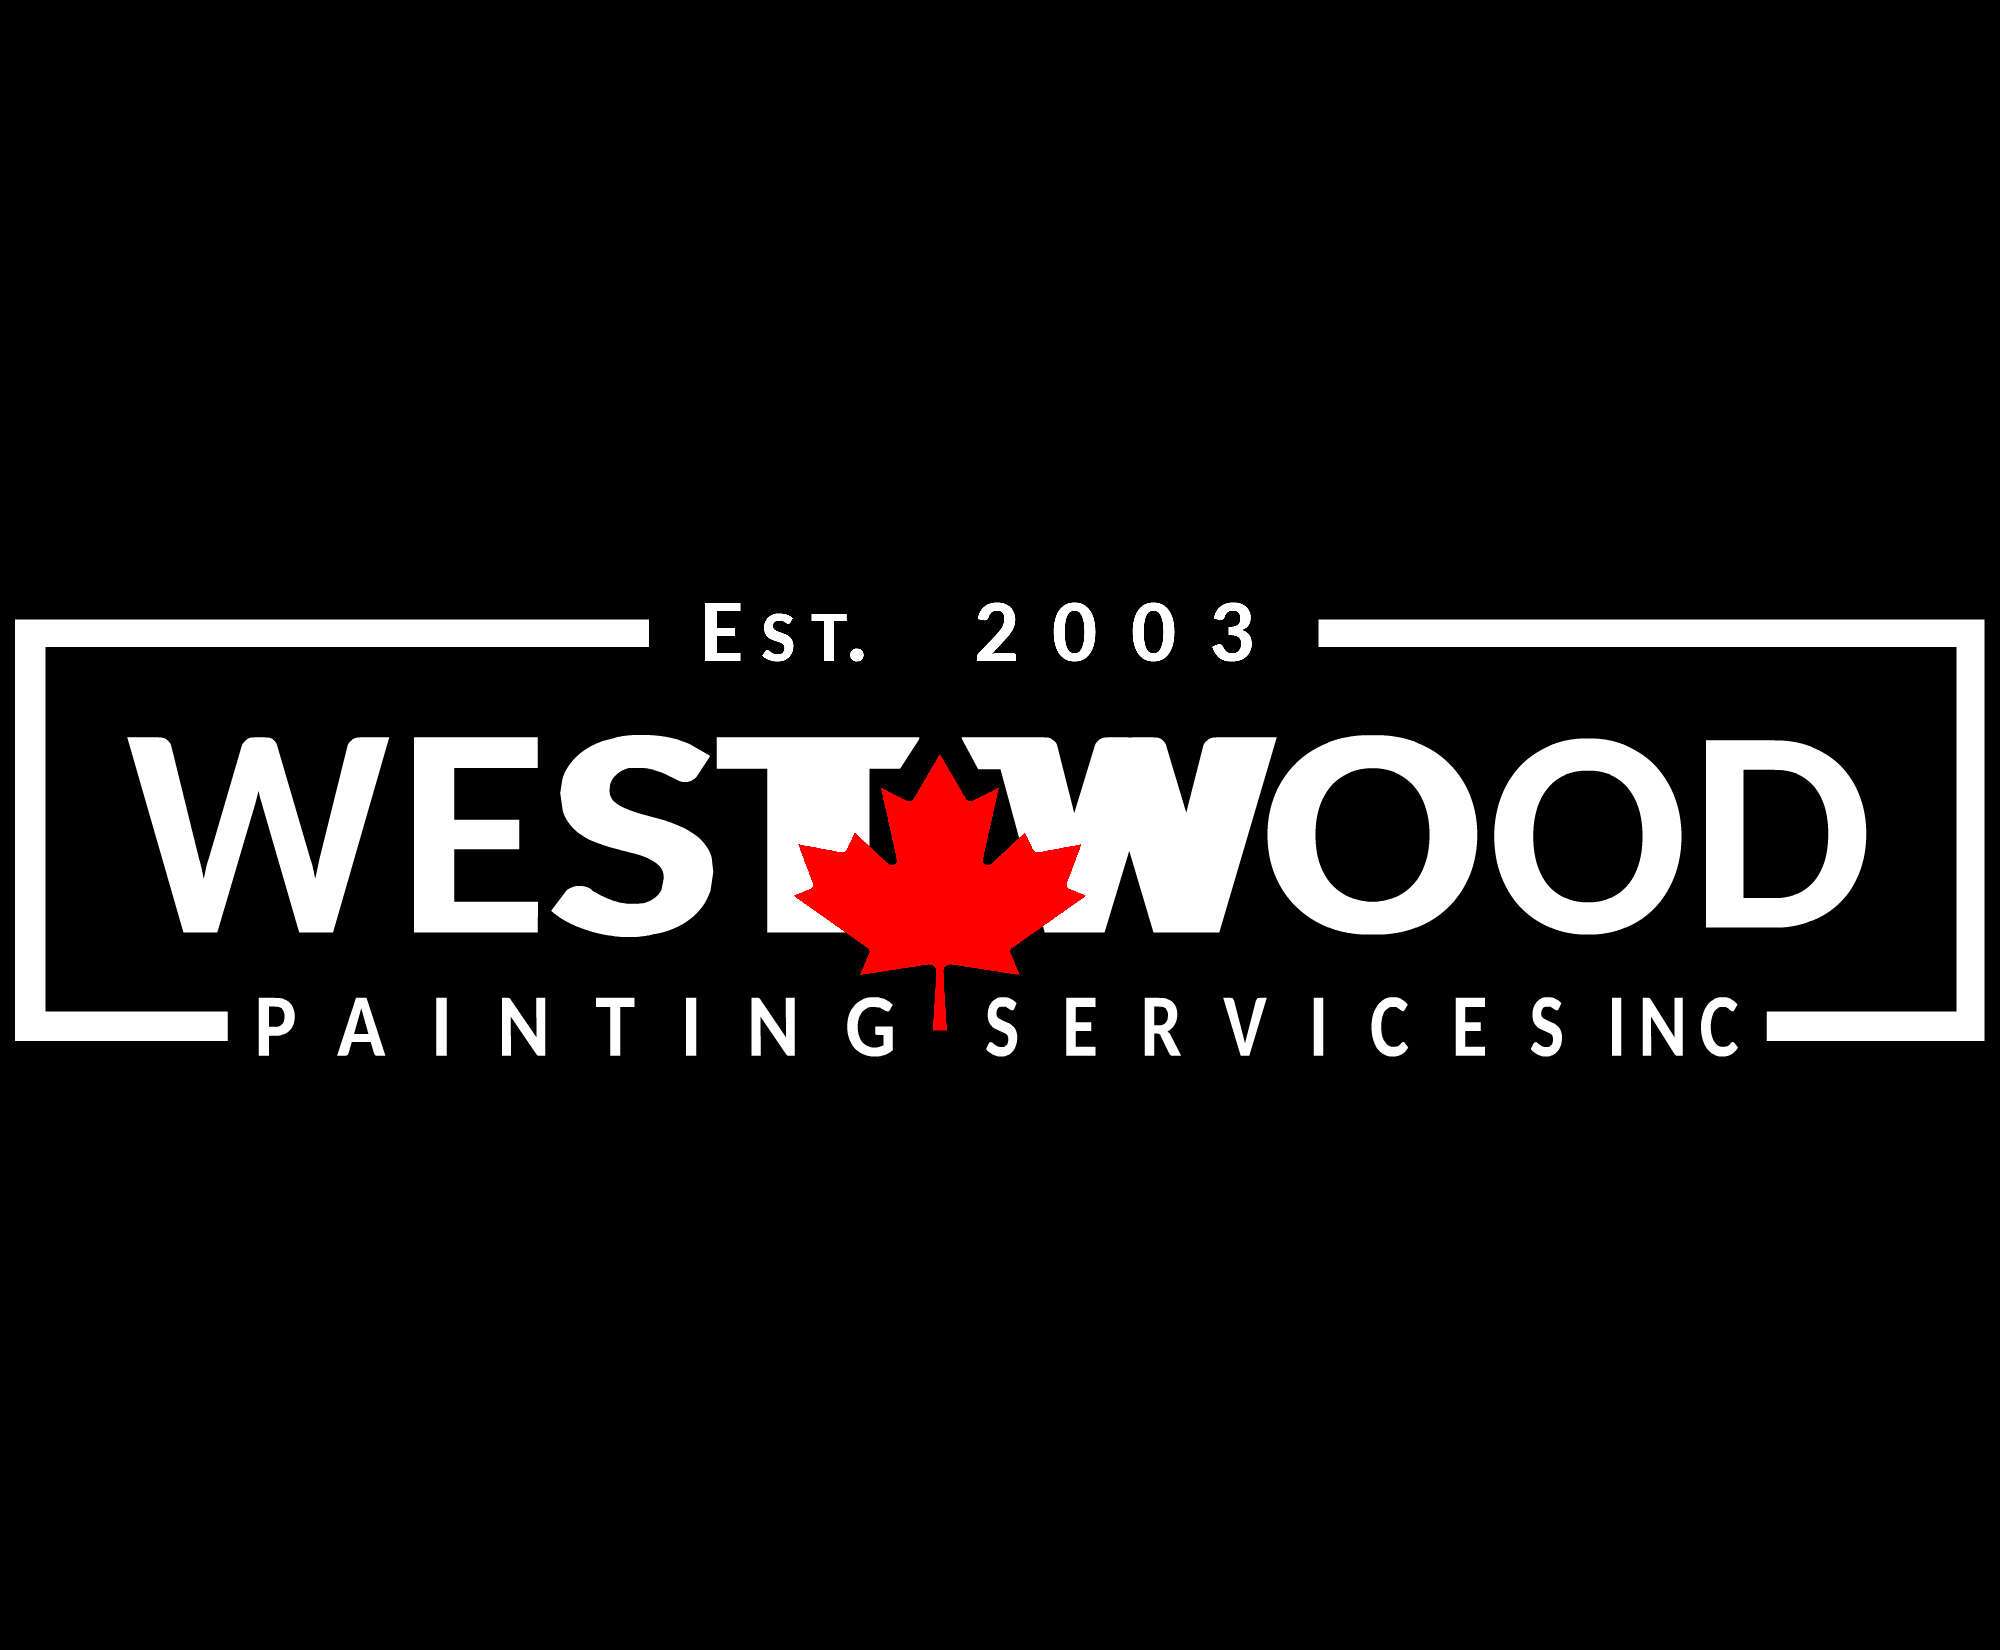 Westwood Painting Services